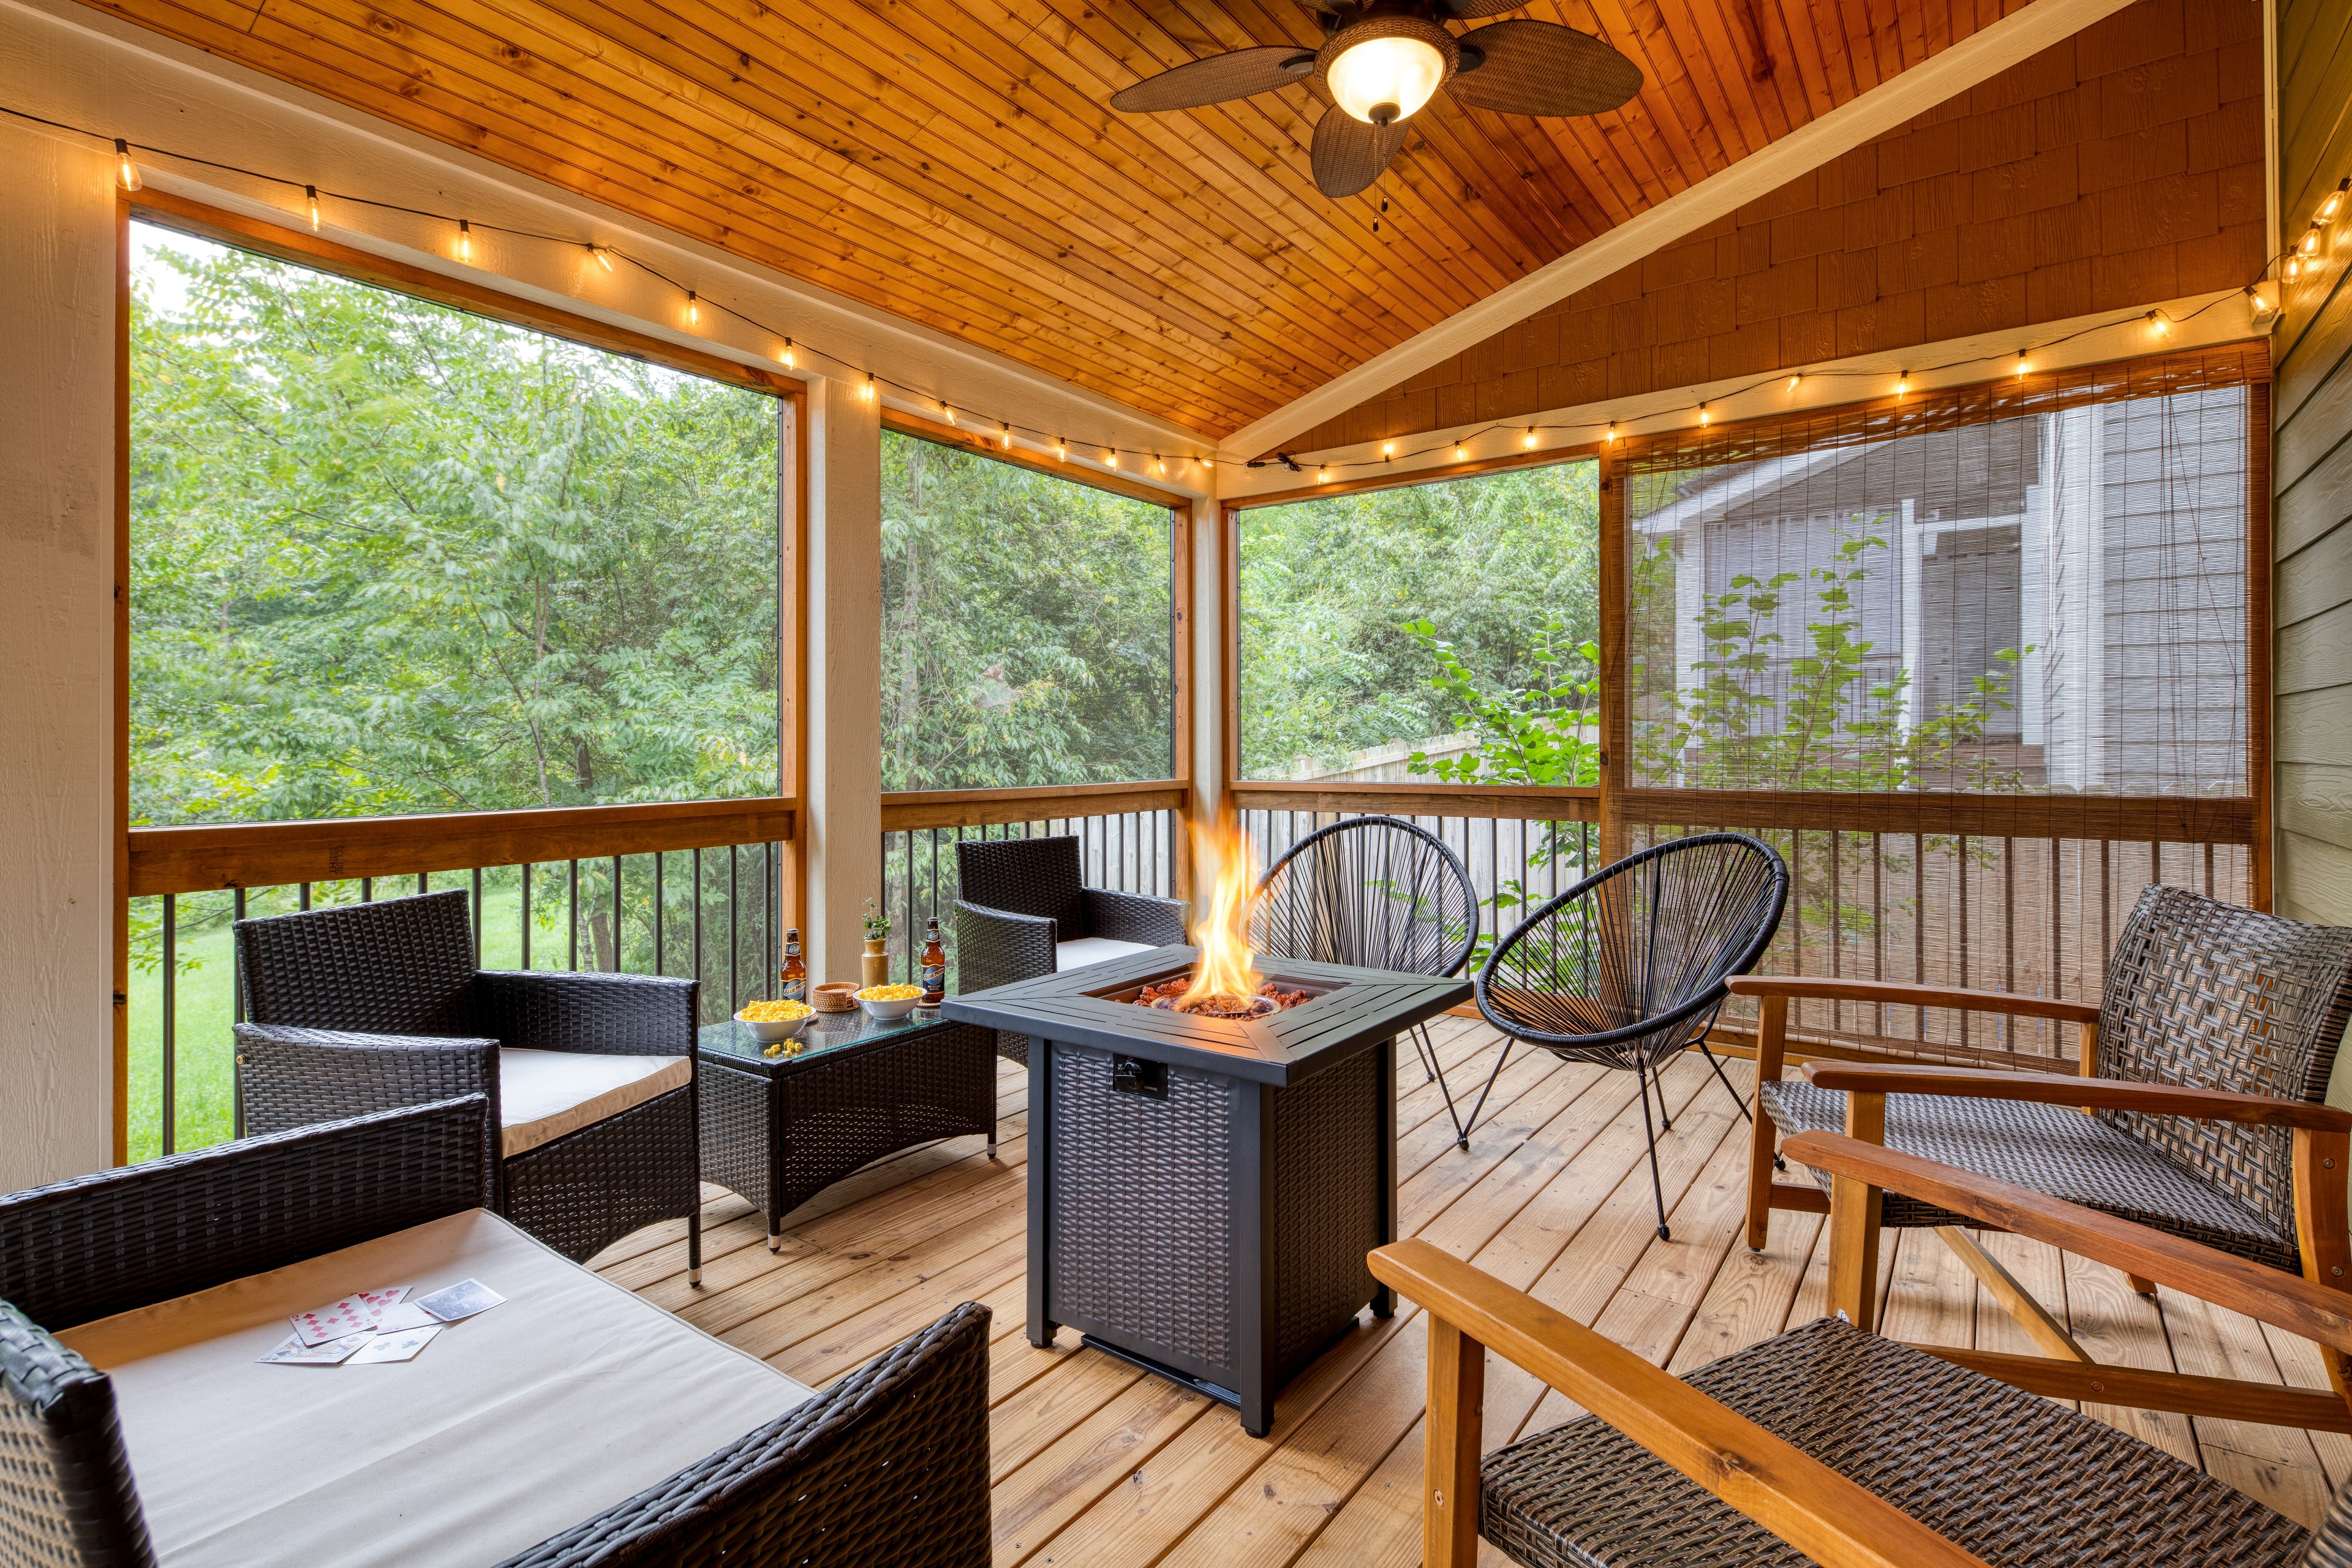 Spacious covered deck with a firepit and tons of seating.